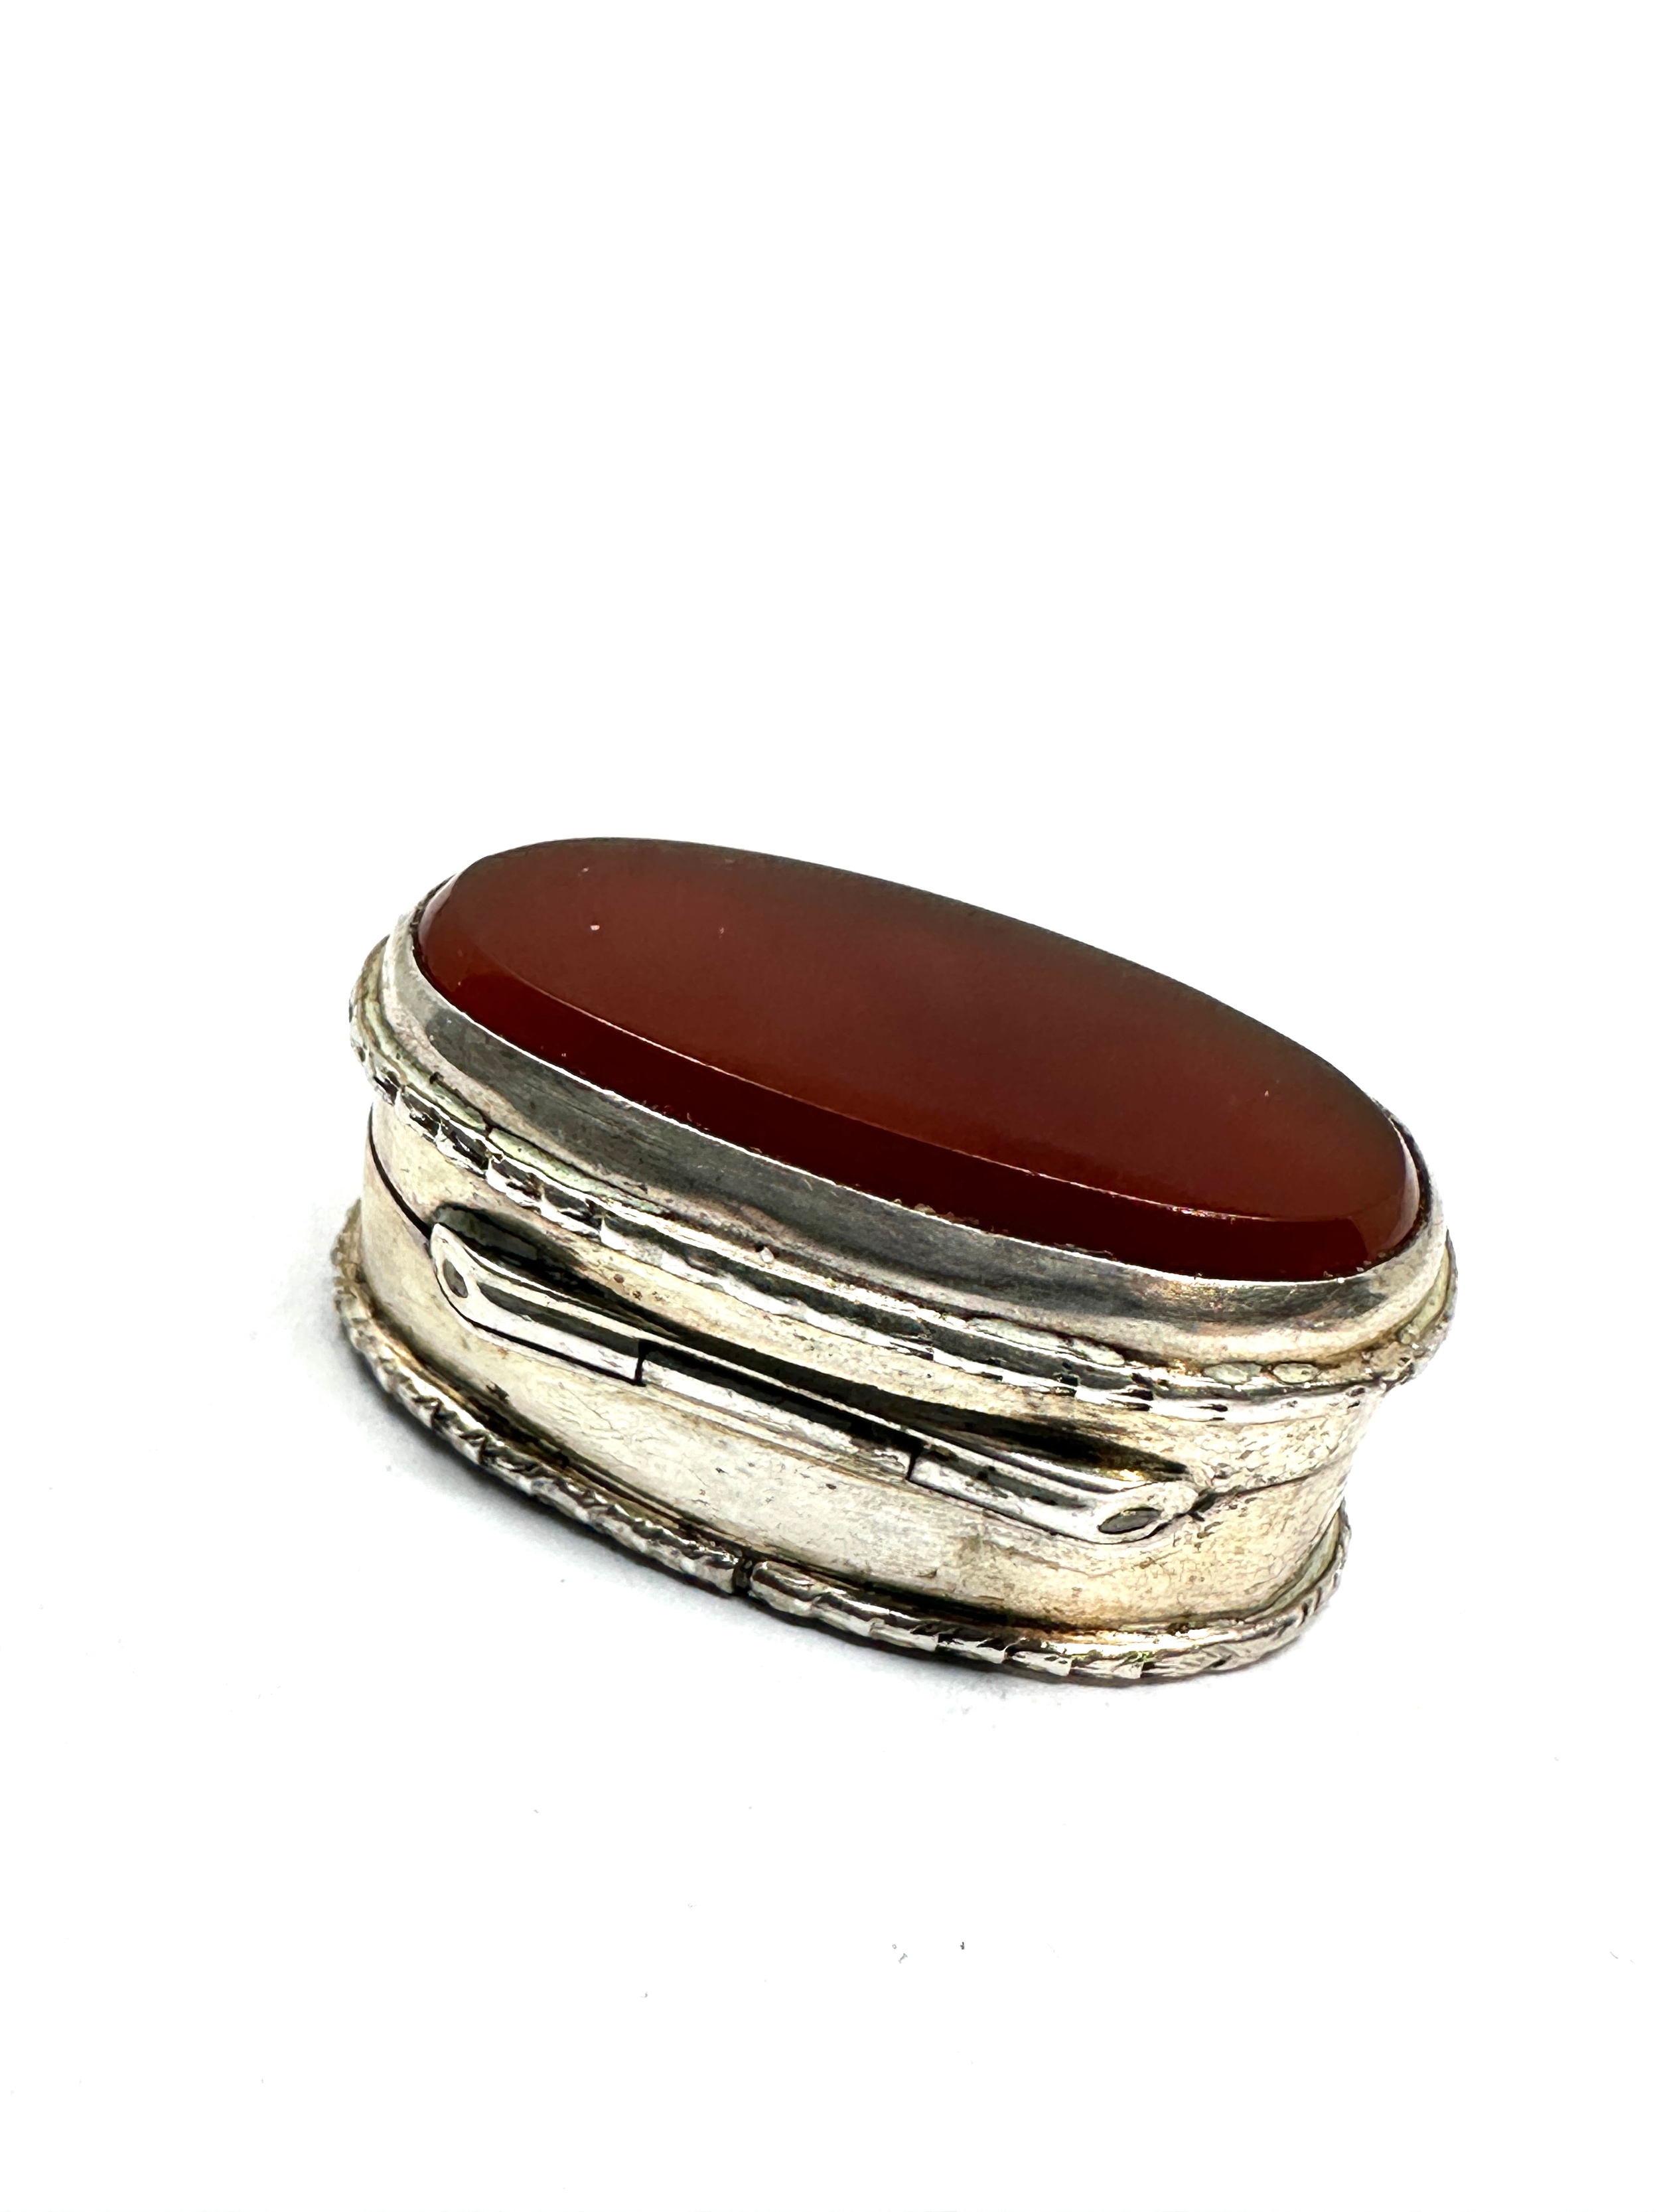 silver agate insert lid pill box measures approx 3.2cm by2cm height 1.5cm hallmarked 800 - Image 3 of 5